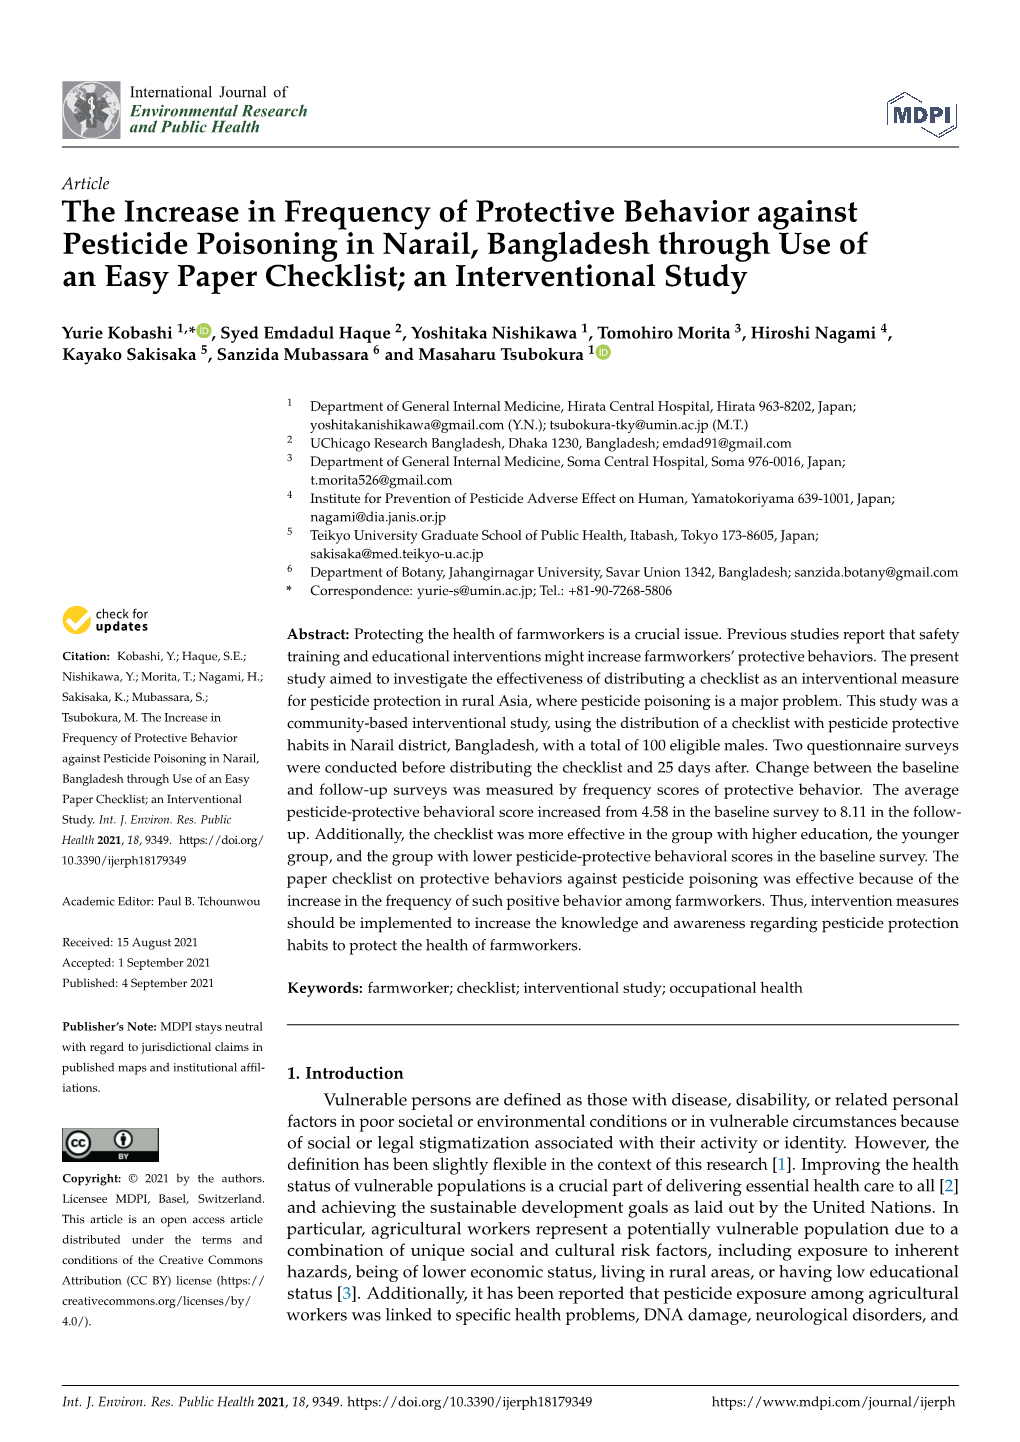 The Increase in Frequency of Protective Behavior Against Pesticide Poisoning in Narail, Bangladesh Through Use of an Easy Paper Checklist; an Interventional Study